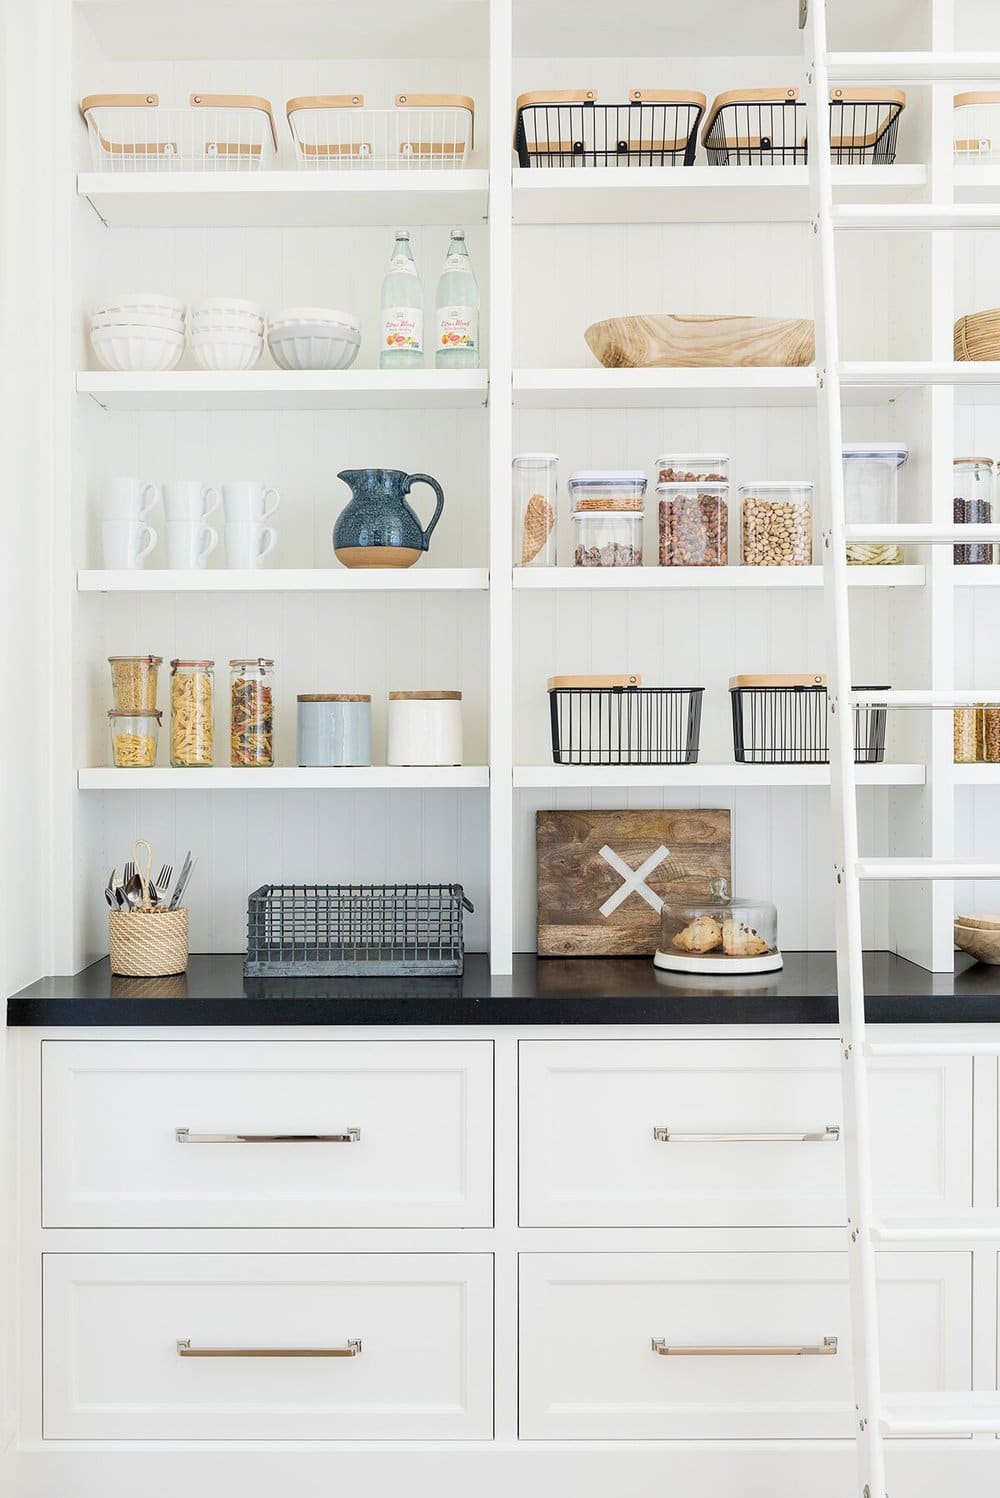 Essentials for splendid Kitchen Organization in the new year with Studio McGee - Lucy Call Photography | pantry | kitchen design ideas | kitchen decor | organized